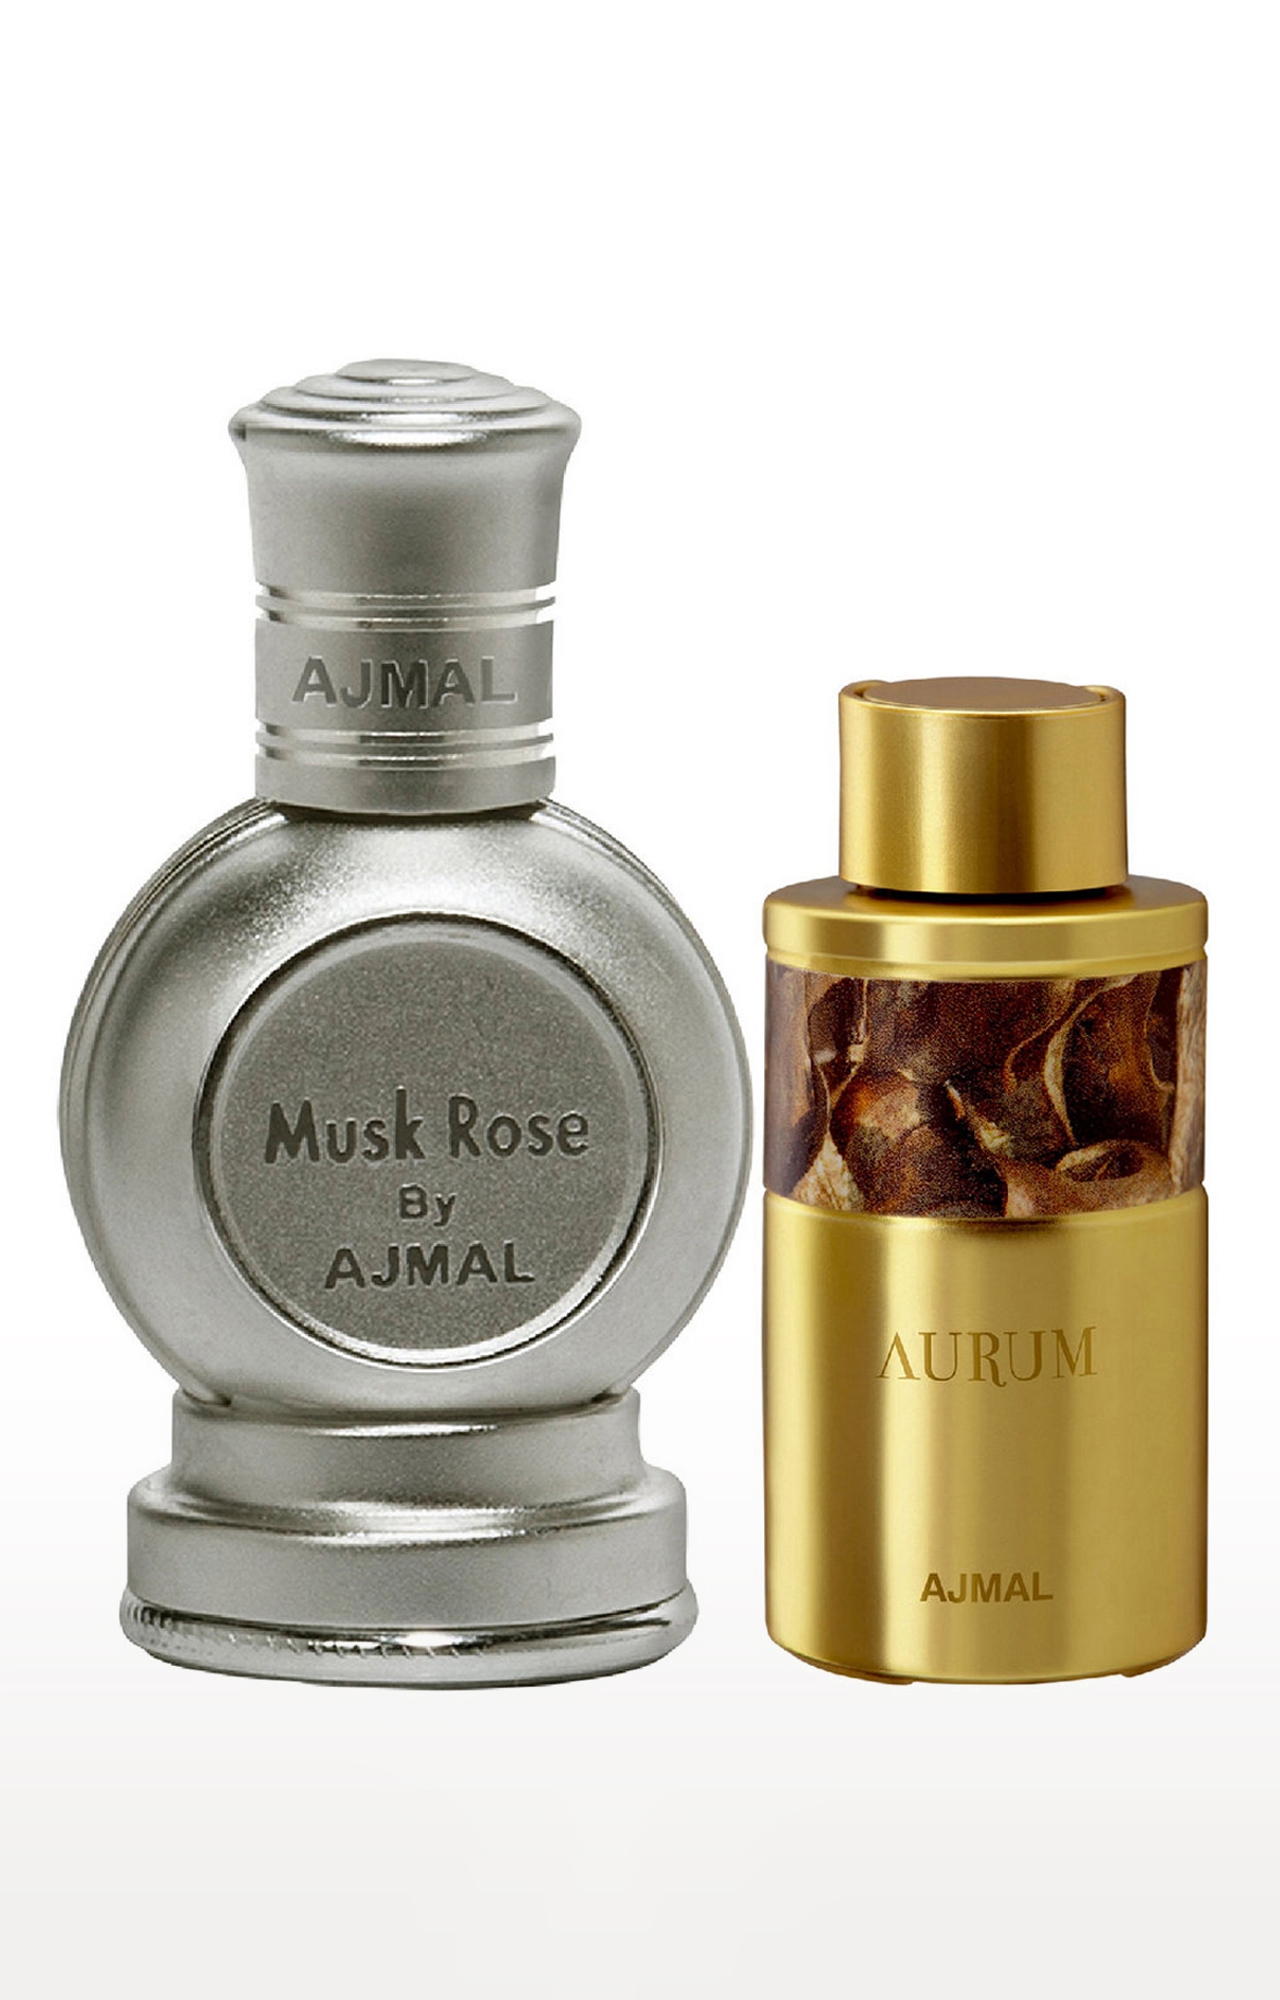 Ajmal | Ajmal Musk Rose Concentrated Perfume Oil Floral Musky Alcohol- Attar 12Ml For Unisex And Aurum Concentrated Perfume Oil Fruity Floral Alcohol- Attar 10Ml For Women